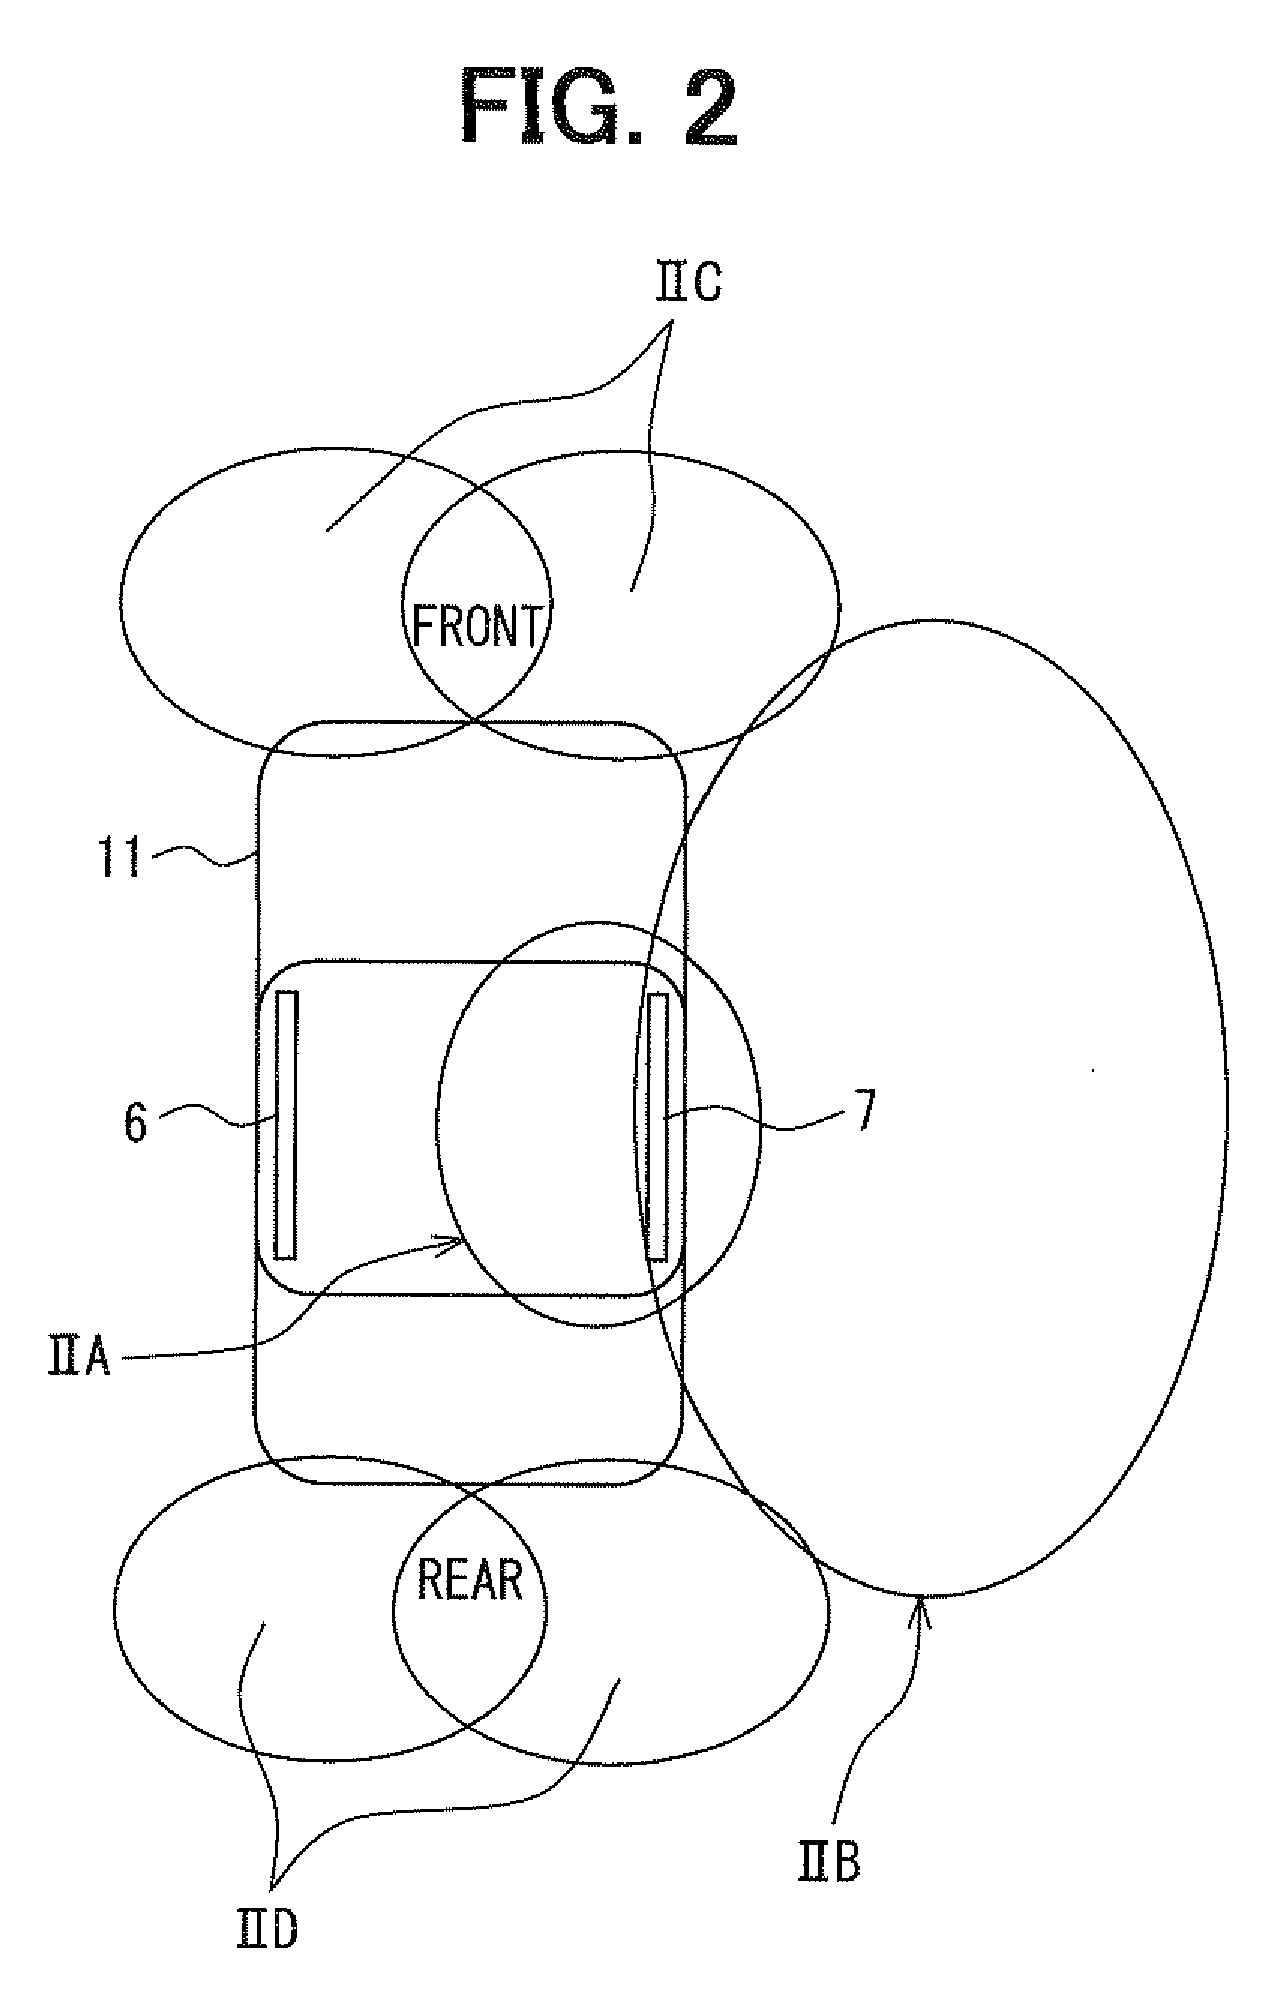 Lighting control apparatus for vehicle